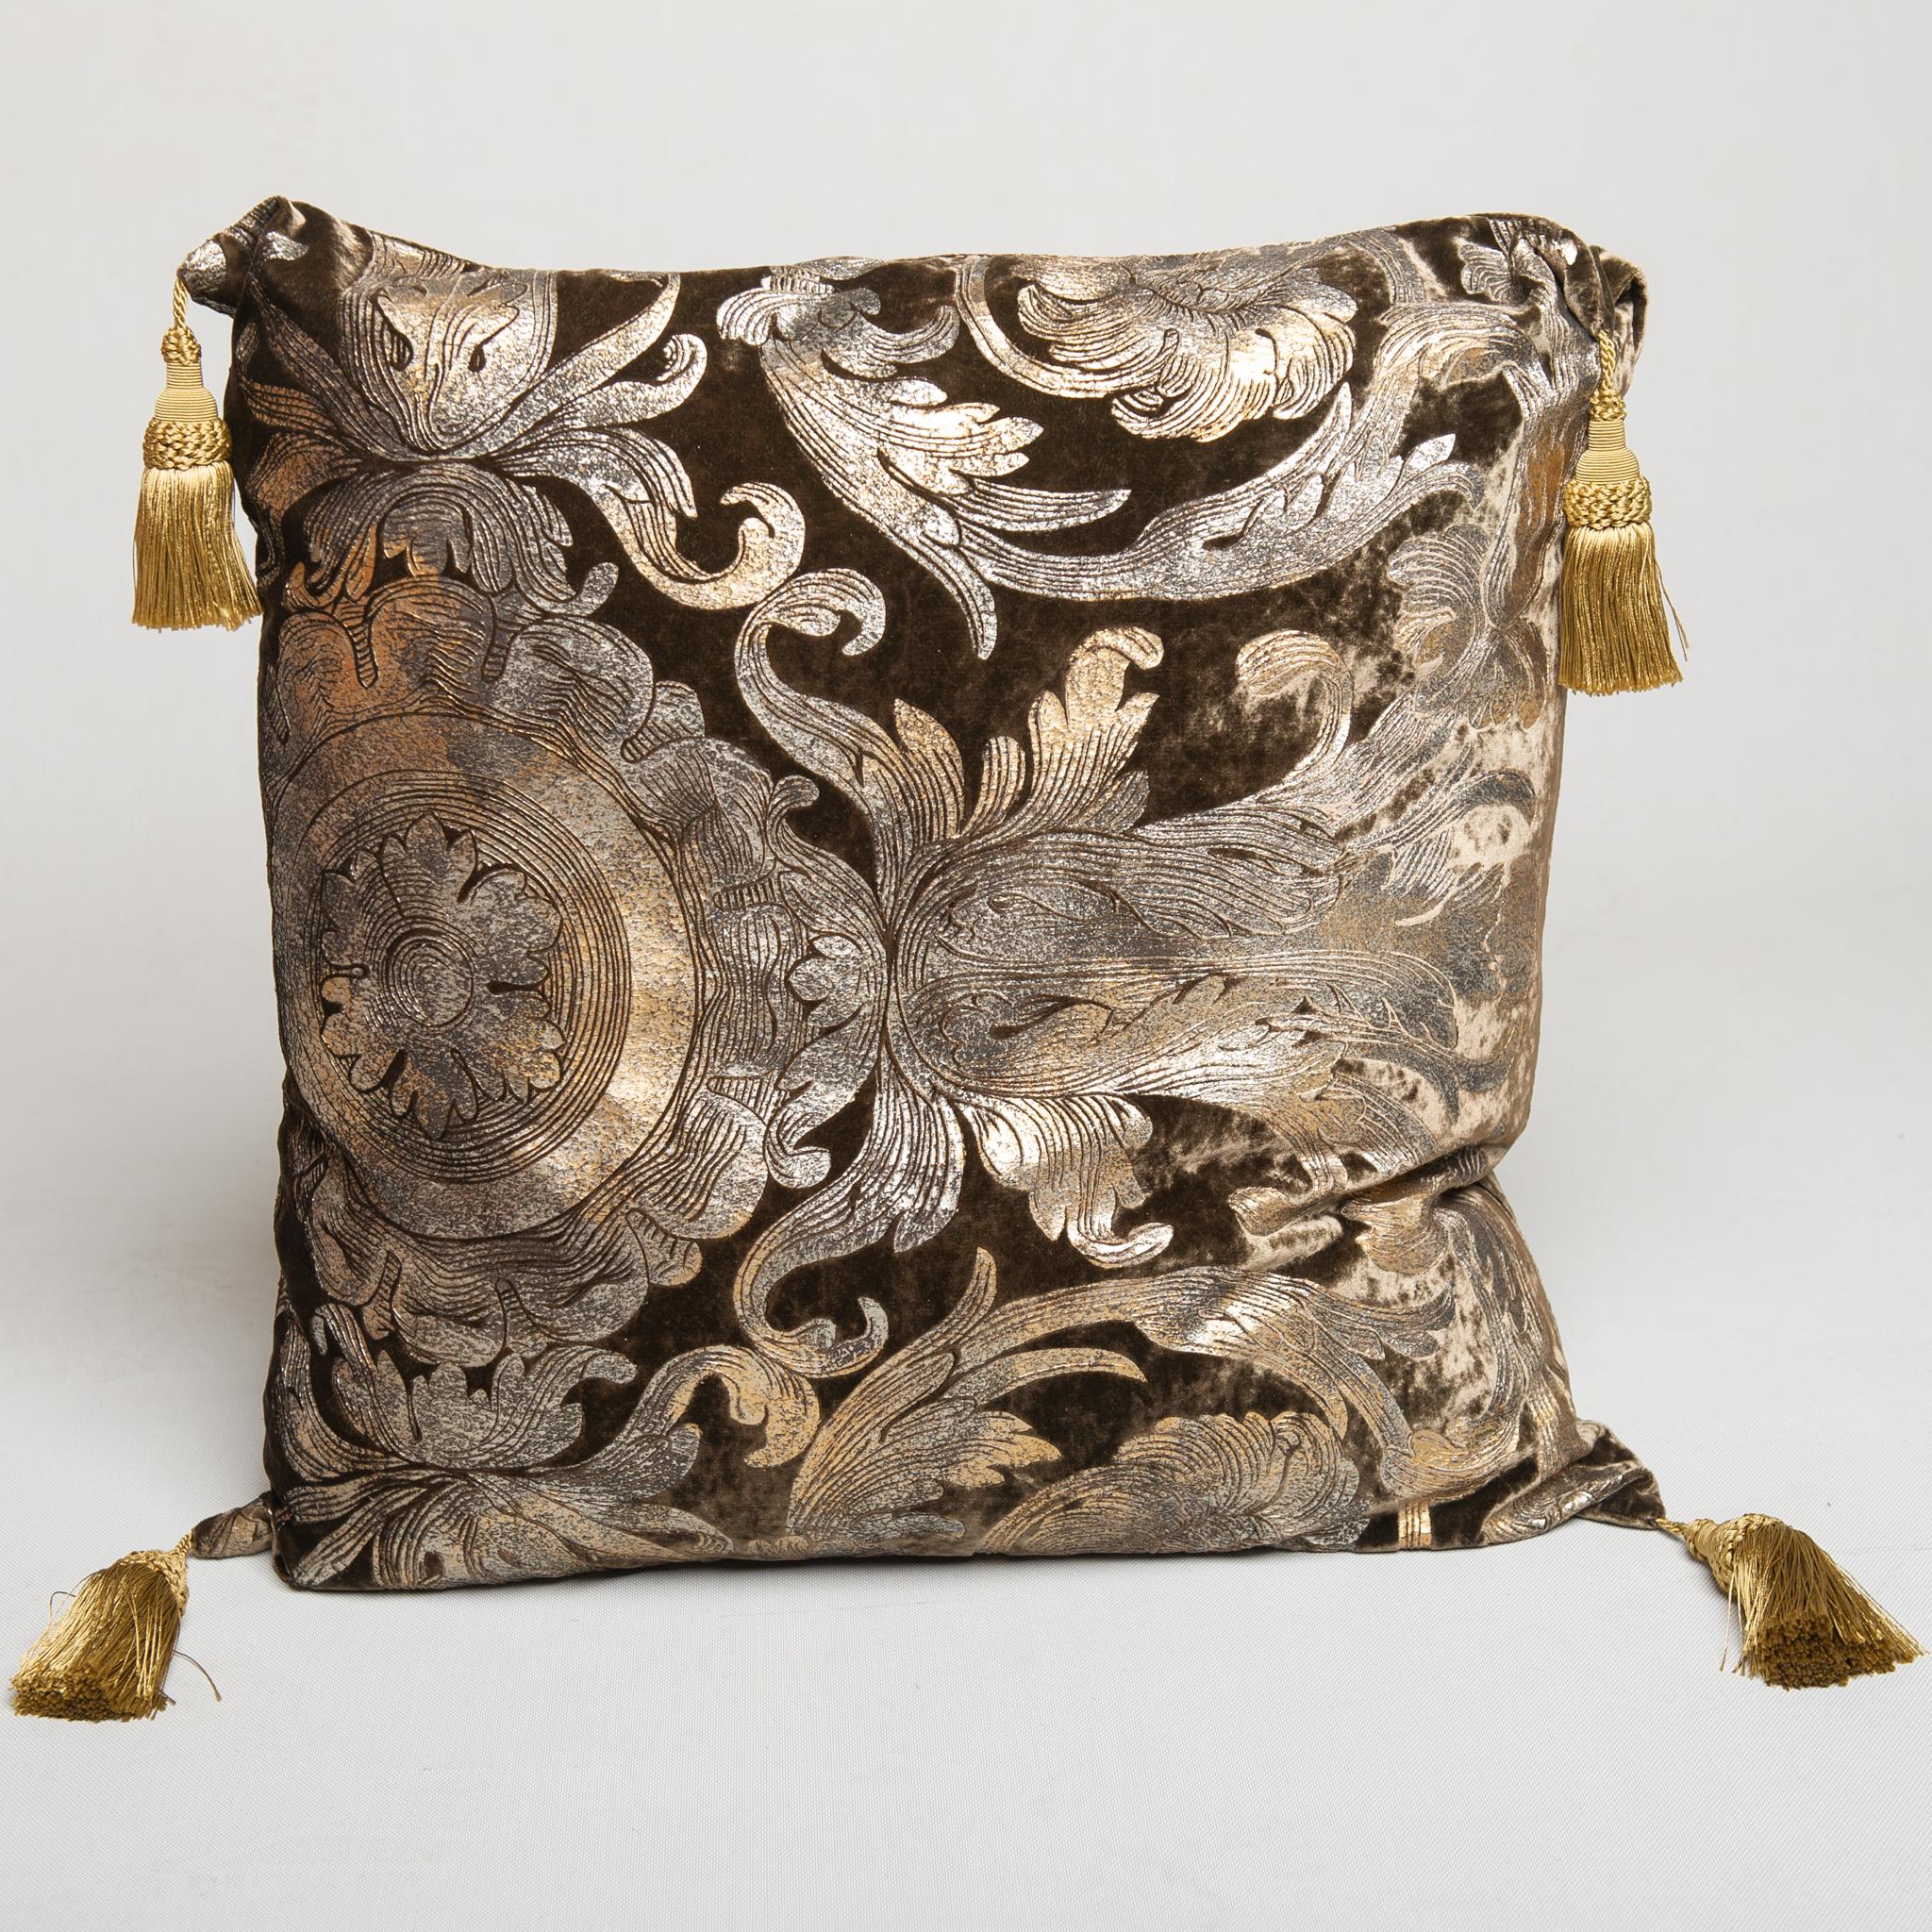 B/1782-1 -  Large cuhion or pillow in silver and gold printed velvet, to be combined with curtain fabrics already published on 1stdibs:
see reference at the bottom of the page.
The whole is very interesting.
 